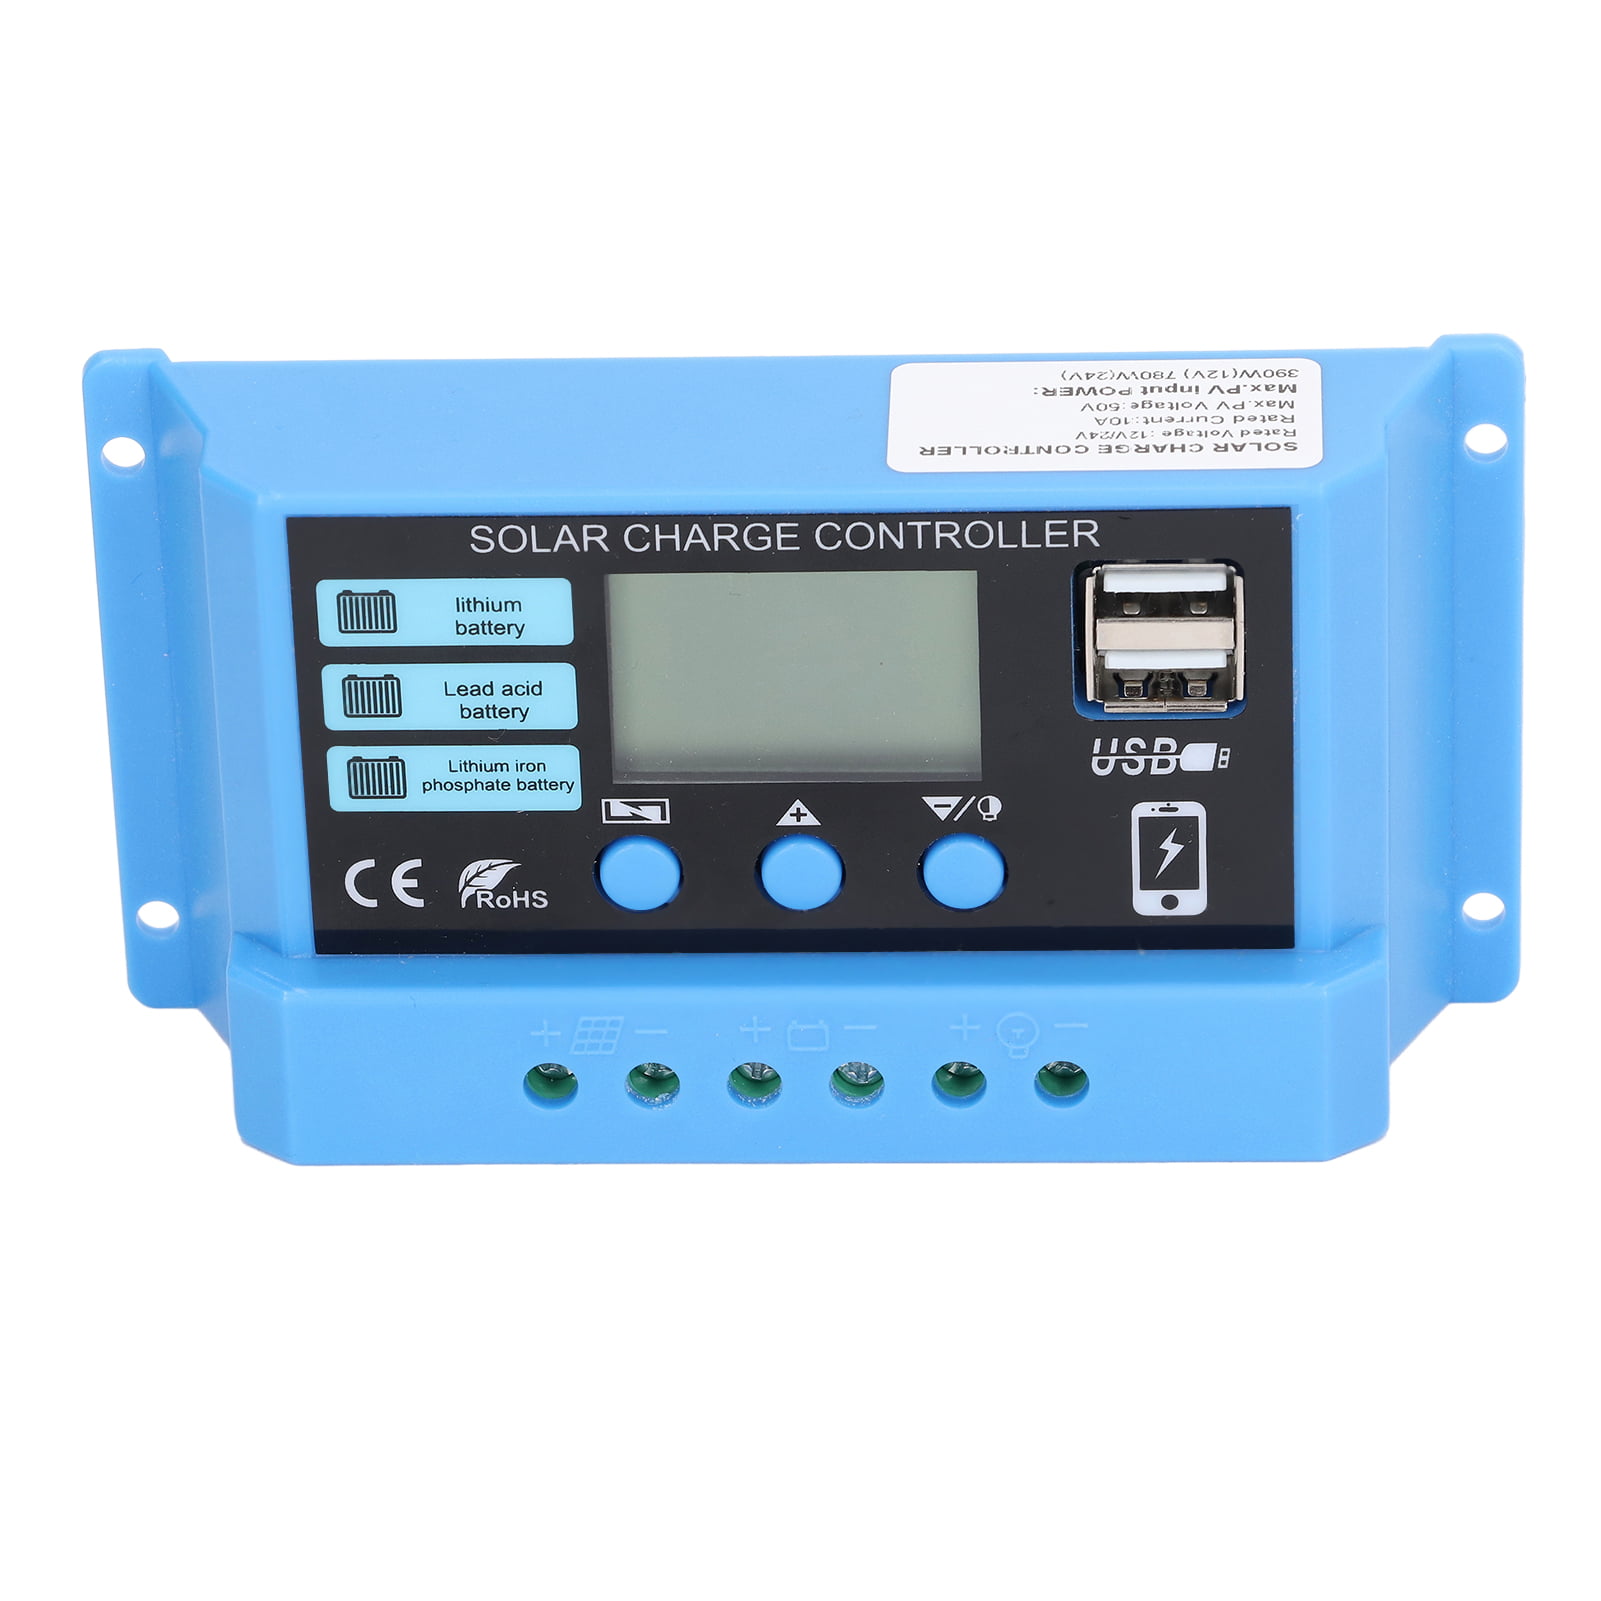 Details about   Solar Charge Controllers PWM+Dual USB Output Module Kits Parts Accessories Tools 